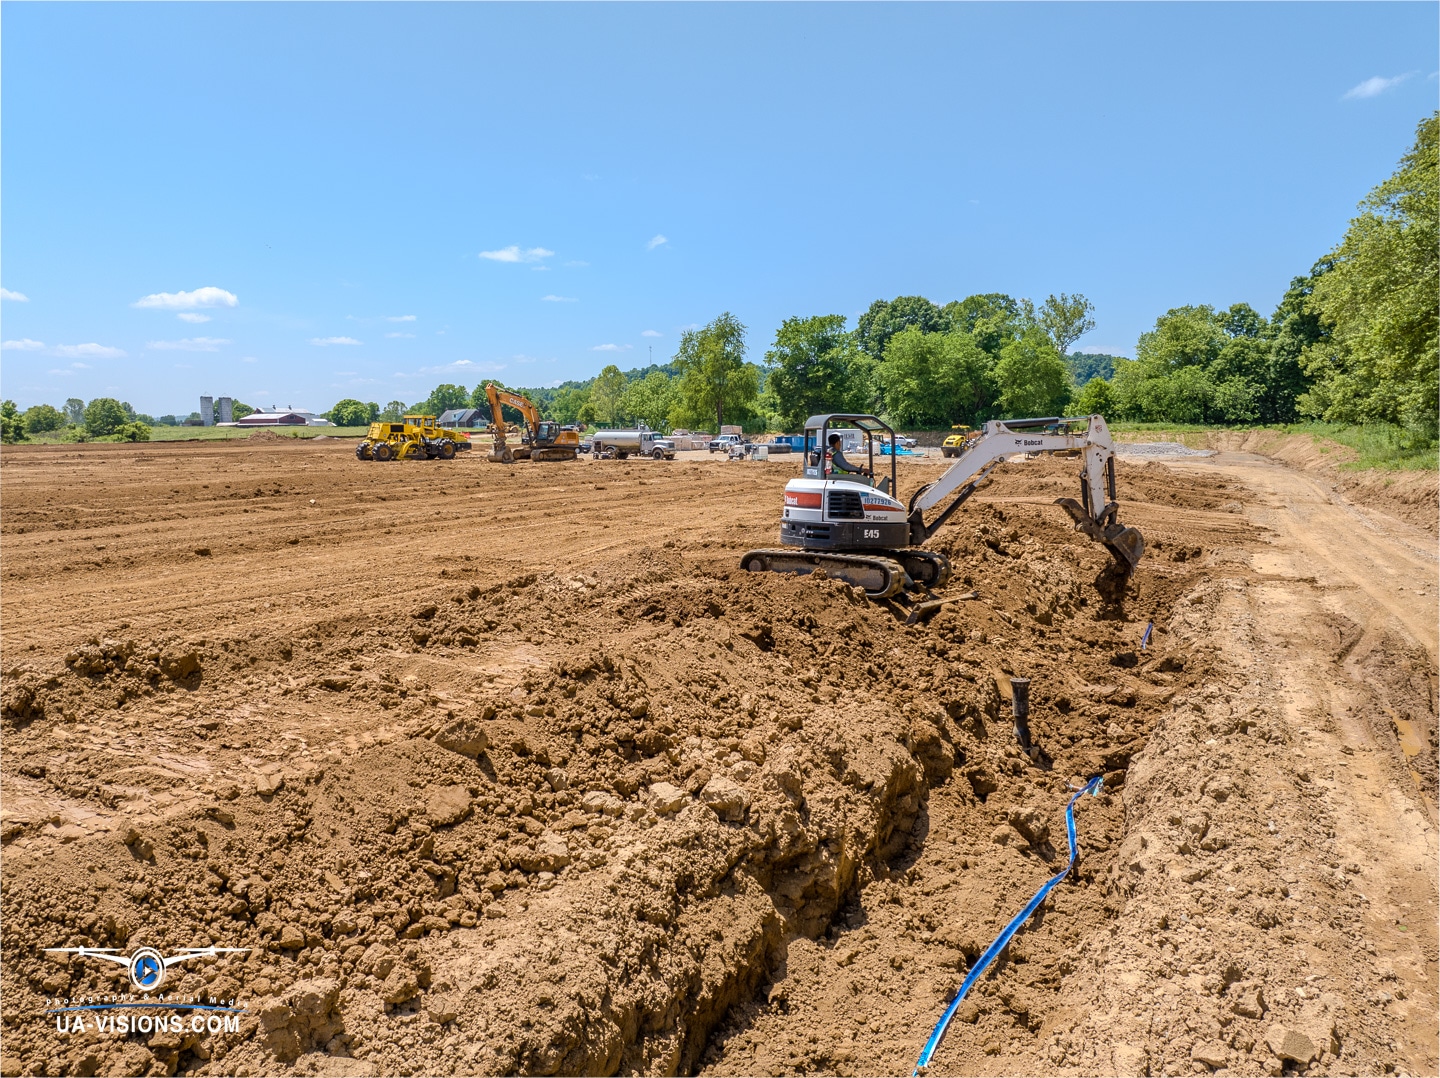 UA-Visions captures the trenches of transformation where SDRS's future utilities will thread through Ashton's soil.